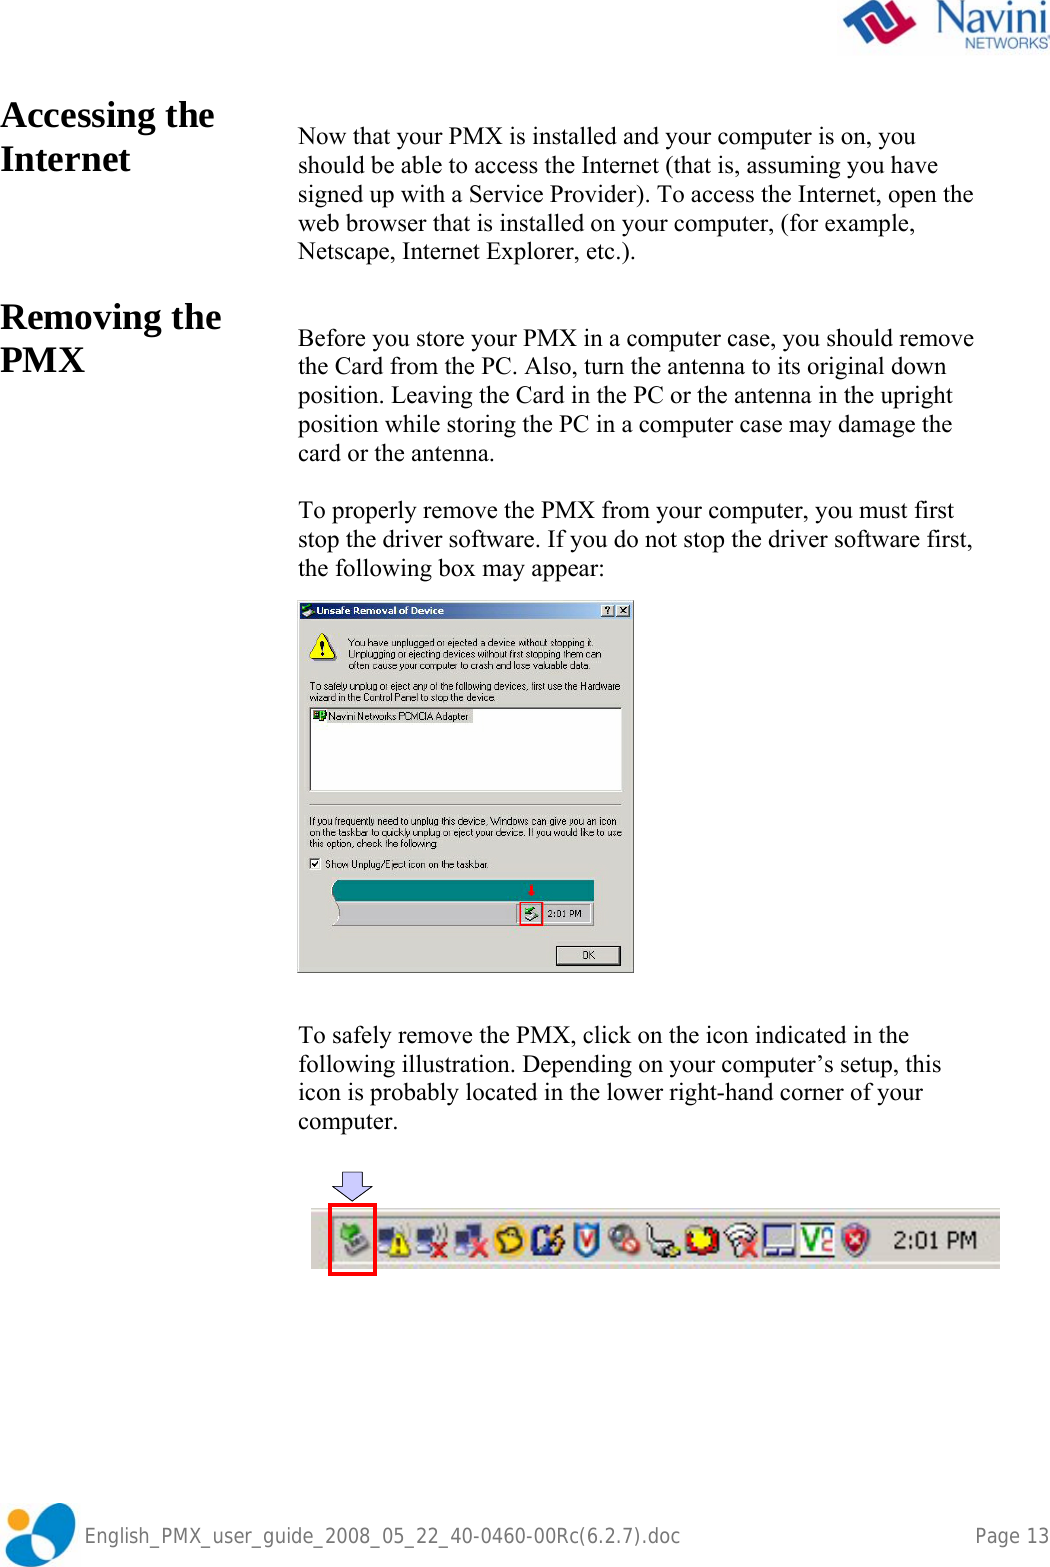               English_PMX_user_guide_2008_05_22_40-0460-00Rc(6.2.7).doc    Page 13 Accessing the Internet     Removing the PMX    Now that your PMX is installed and your computer is on, you should be able to access the Internet (that is, assuming you have signed up with a Service Provider). To access the Internet, open the web browser that is installed on your computer, (for example, Netscape, Internet Explorer, etc.).   Before you store your PMX in a computer case, you should remove the Card from the PC. Also, turn the antenna to its original down position. Leaving the Card in the PC or the antenna in the upright position while storing the PC in a computer case may damage the card or the antenna.  To properly remove the PMX from your computer, you must first stop the driver software. If you do not stop the driver software first, the following box may appear:     To safely remove the PMX, click on the icon indicated in the following illustration. Depending on your computer’s setup, this icon is probably located in the lower right-hand corner of your computer.    